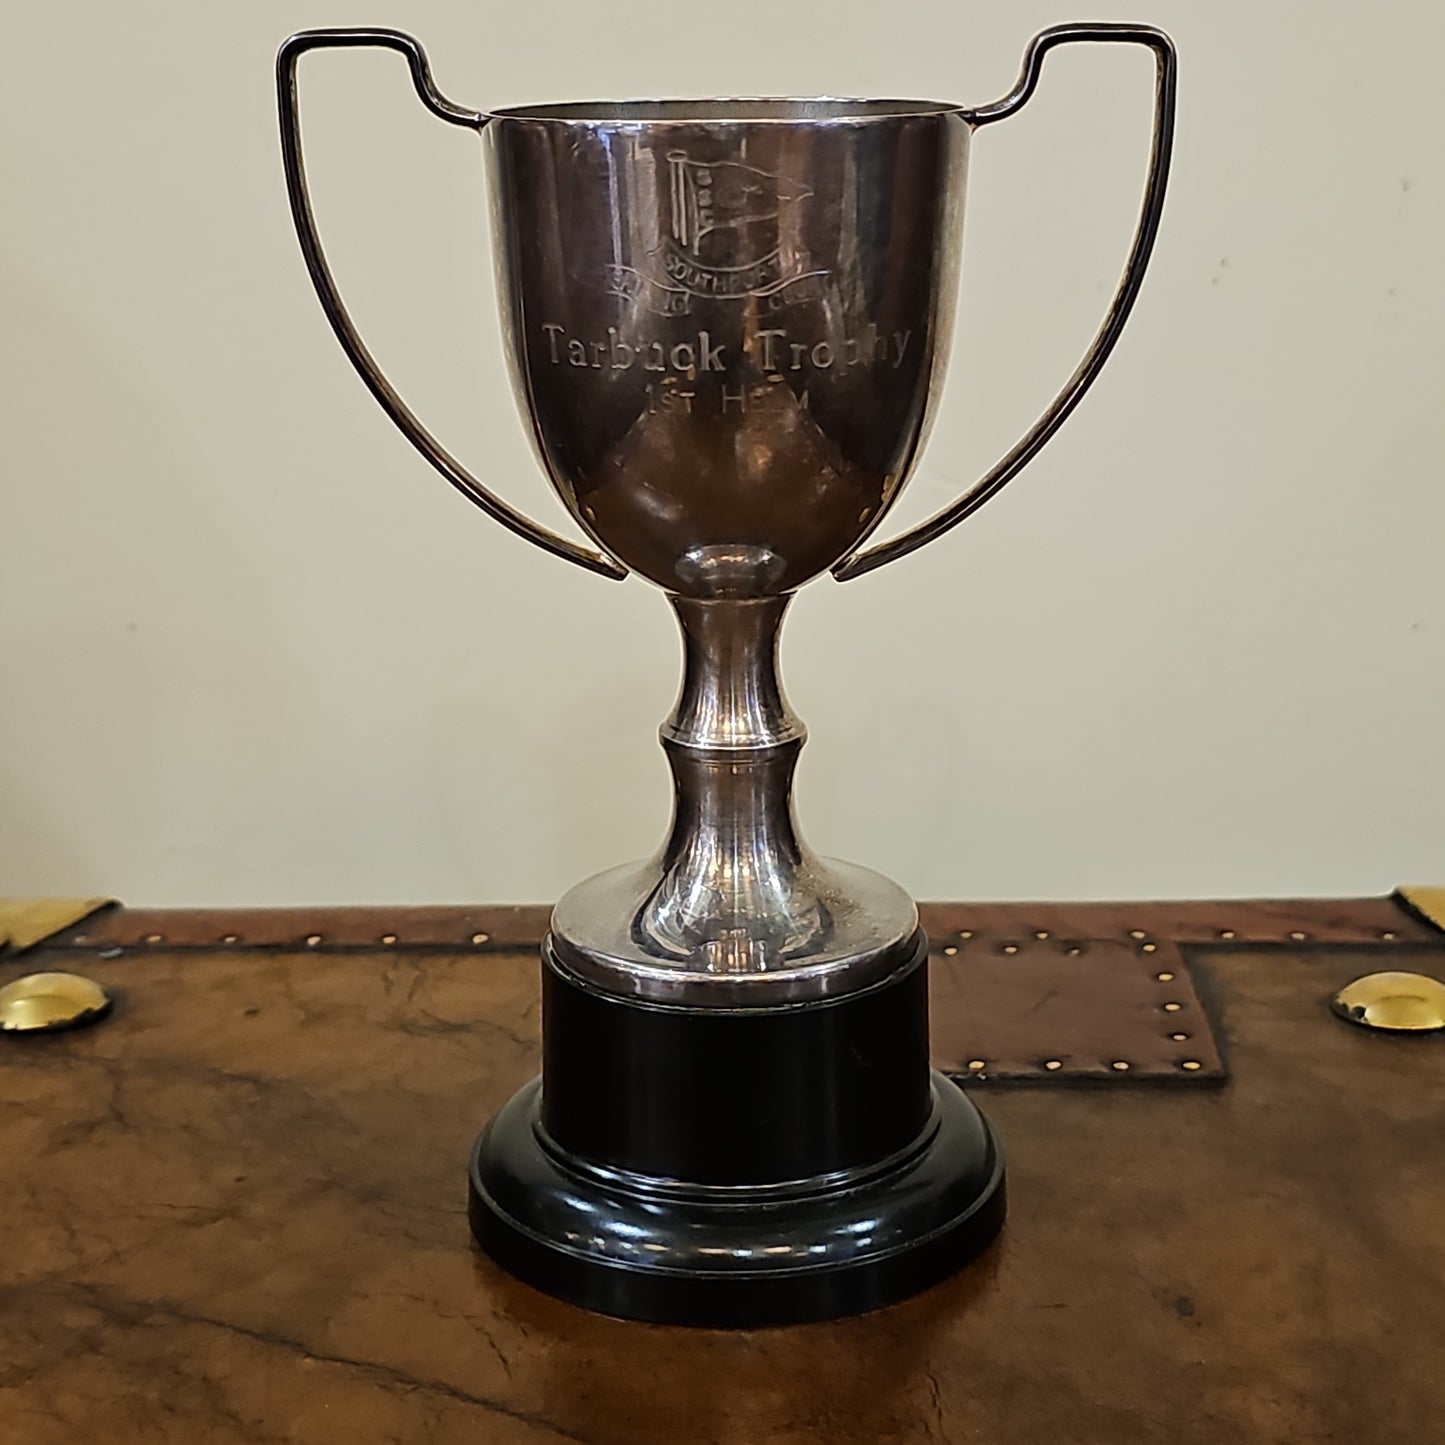 Vintage Trophy, "Southport Sailing Club, Tarbuck Trophy"